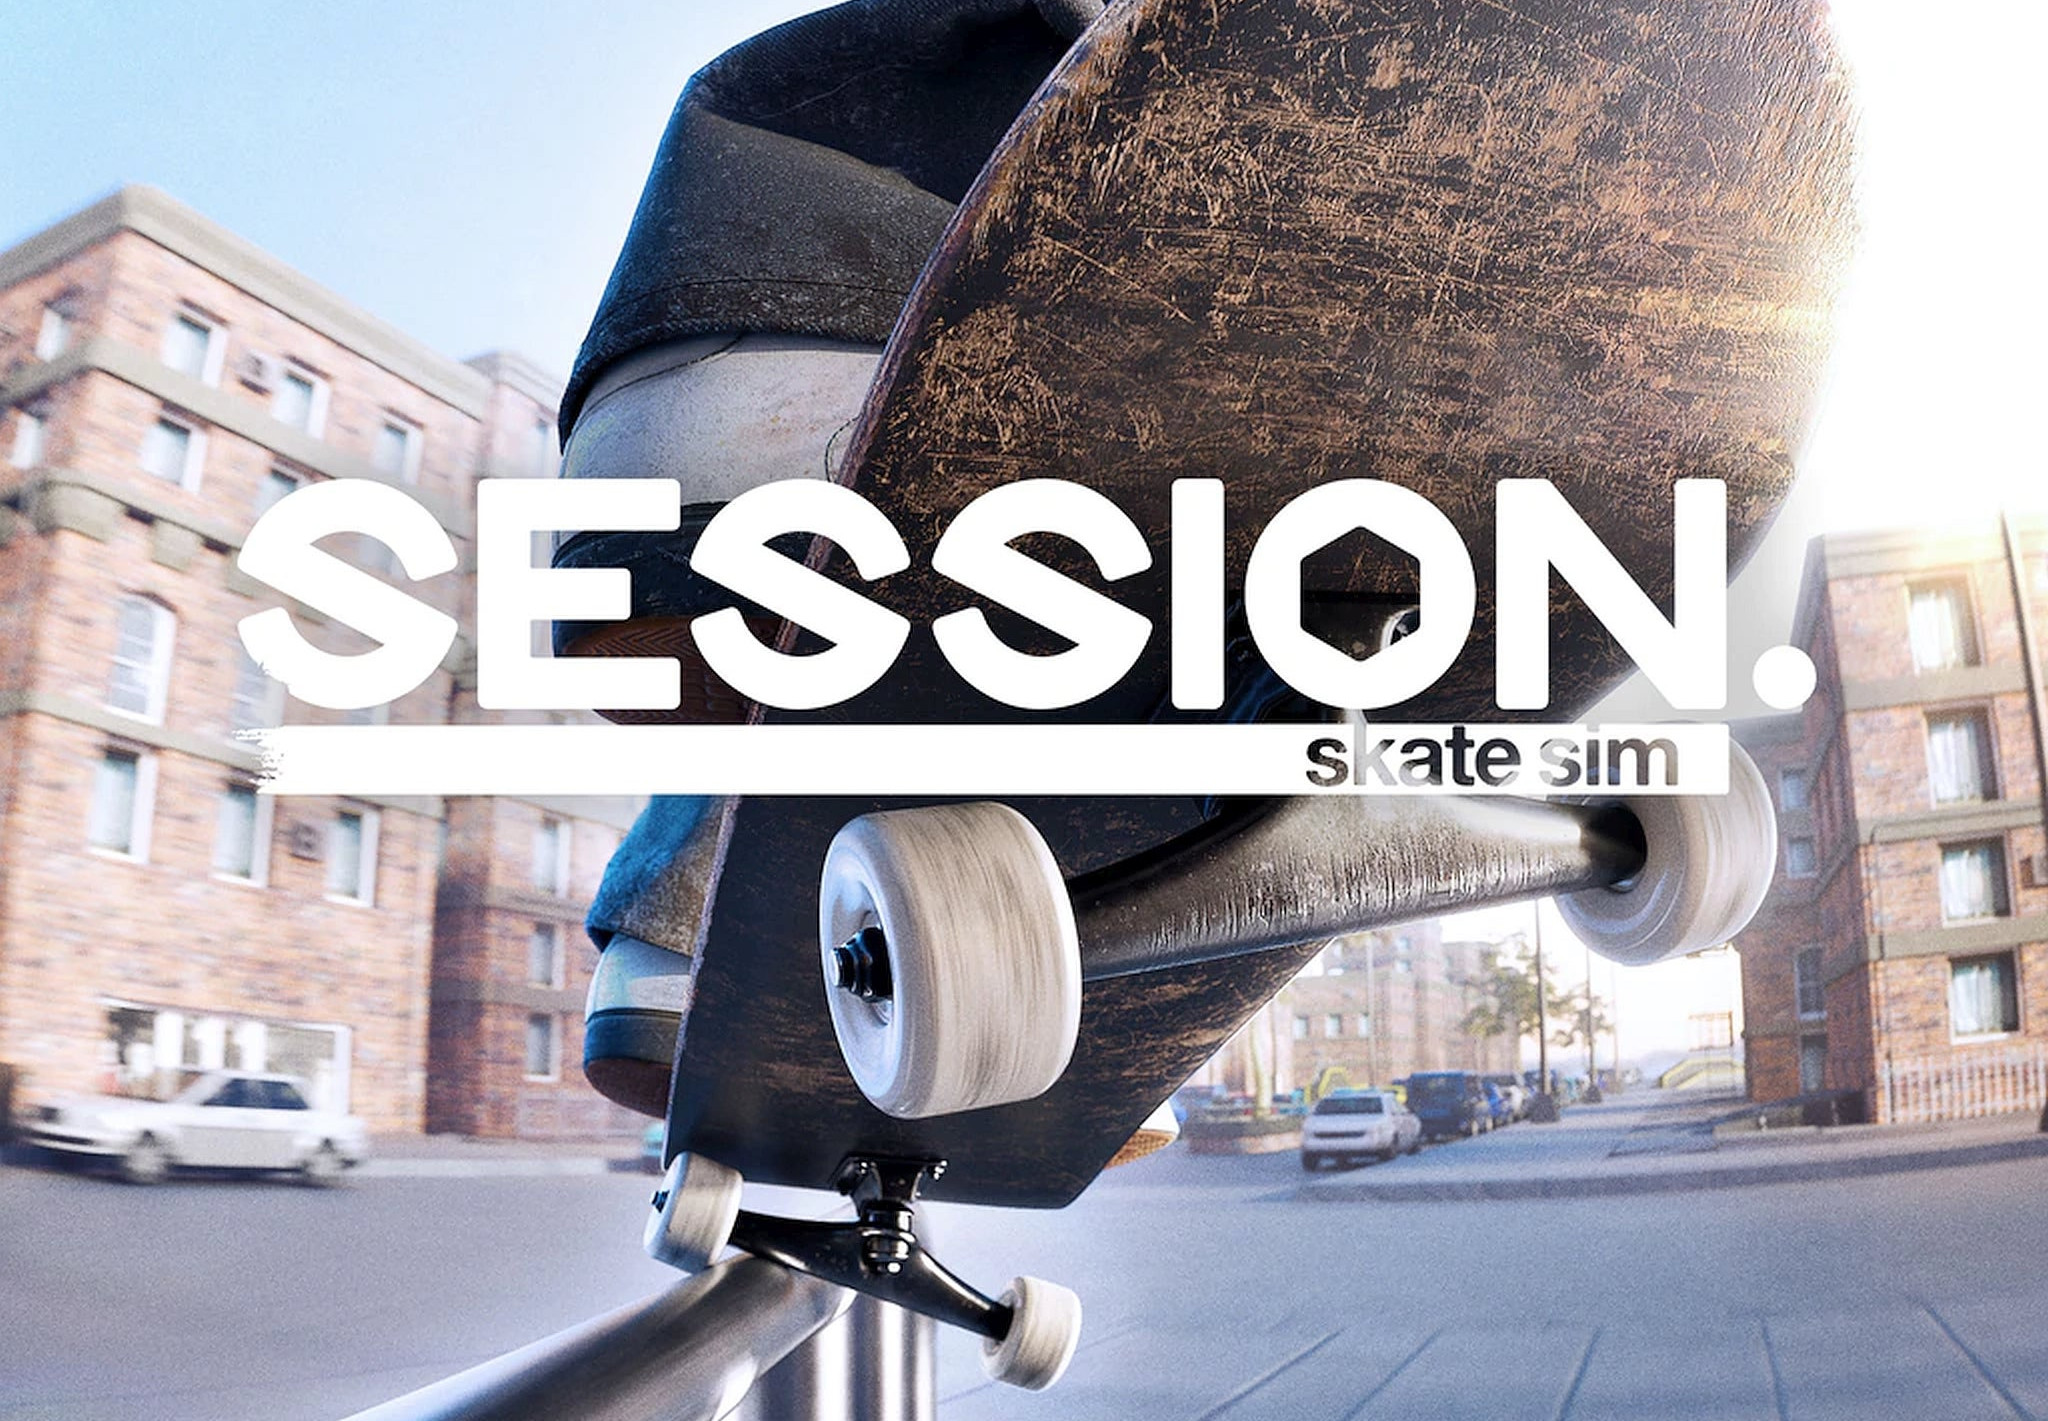 Session: Skate Sim PlayStation 4 Account Pixelpuffin.net Activation Link